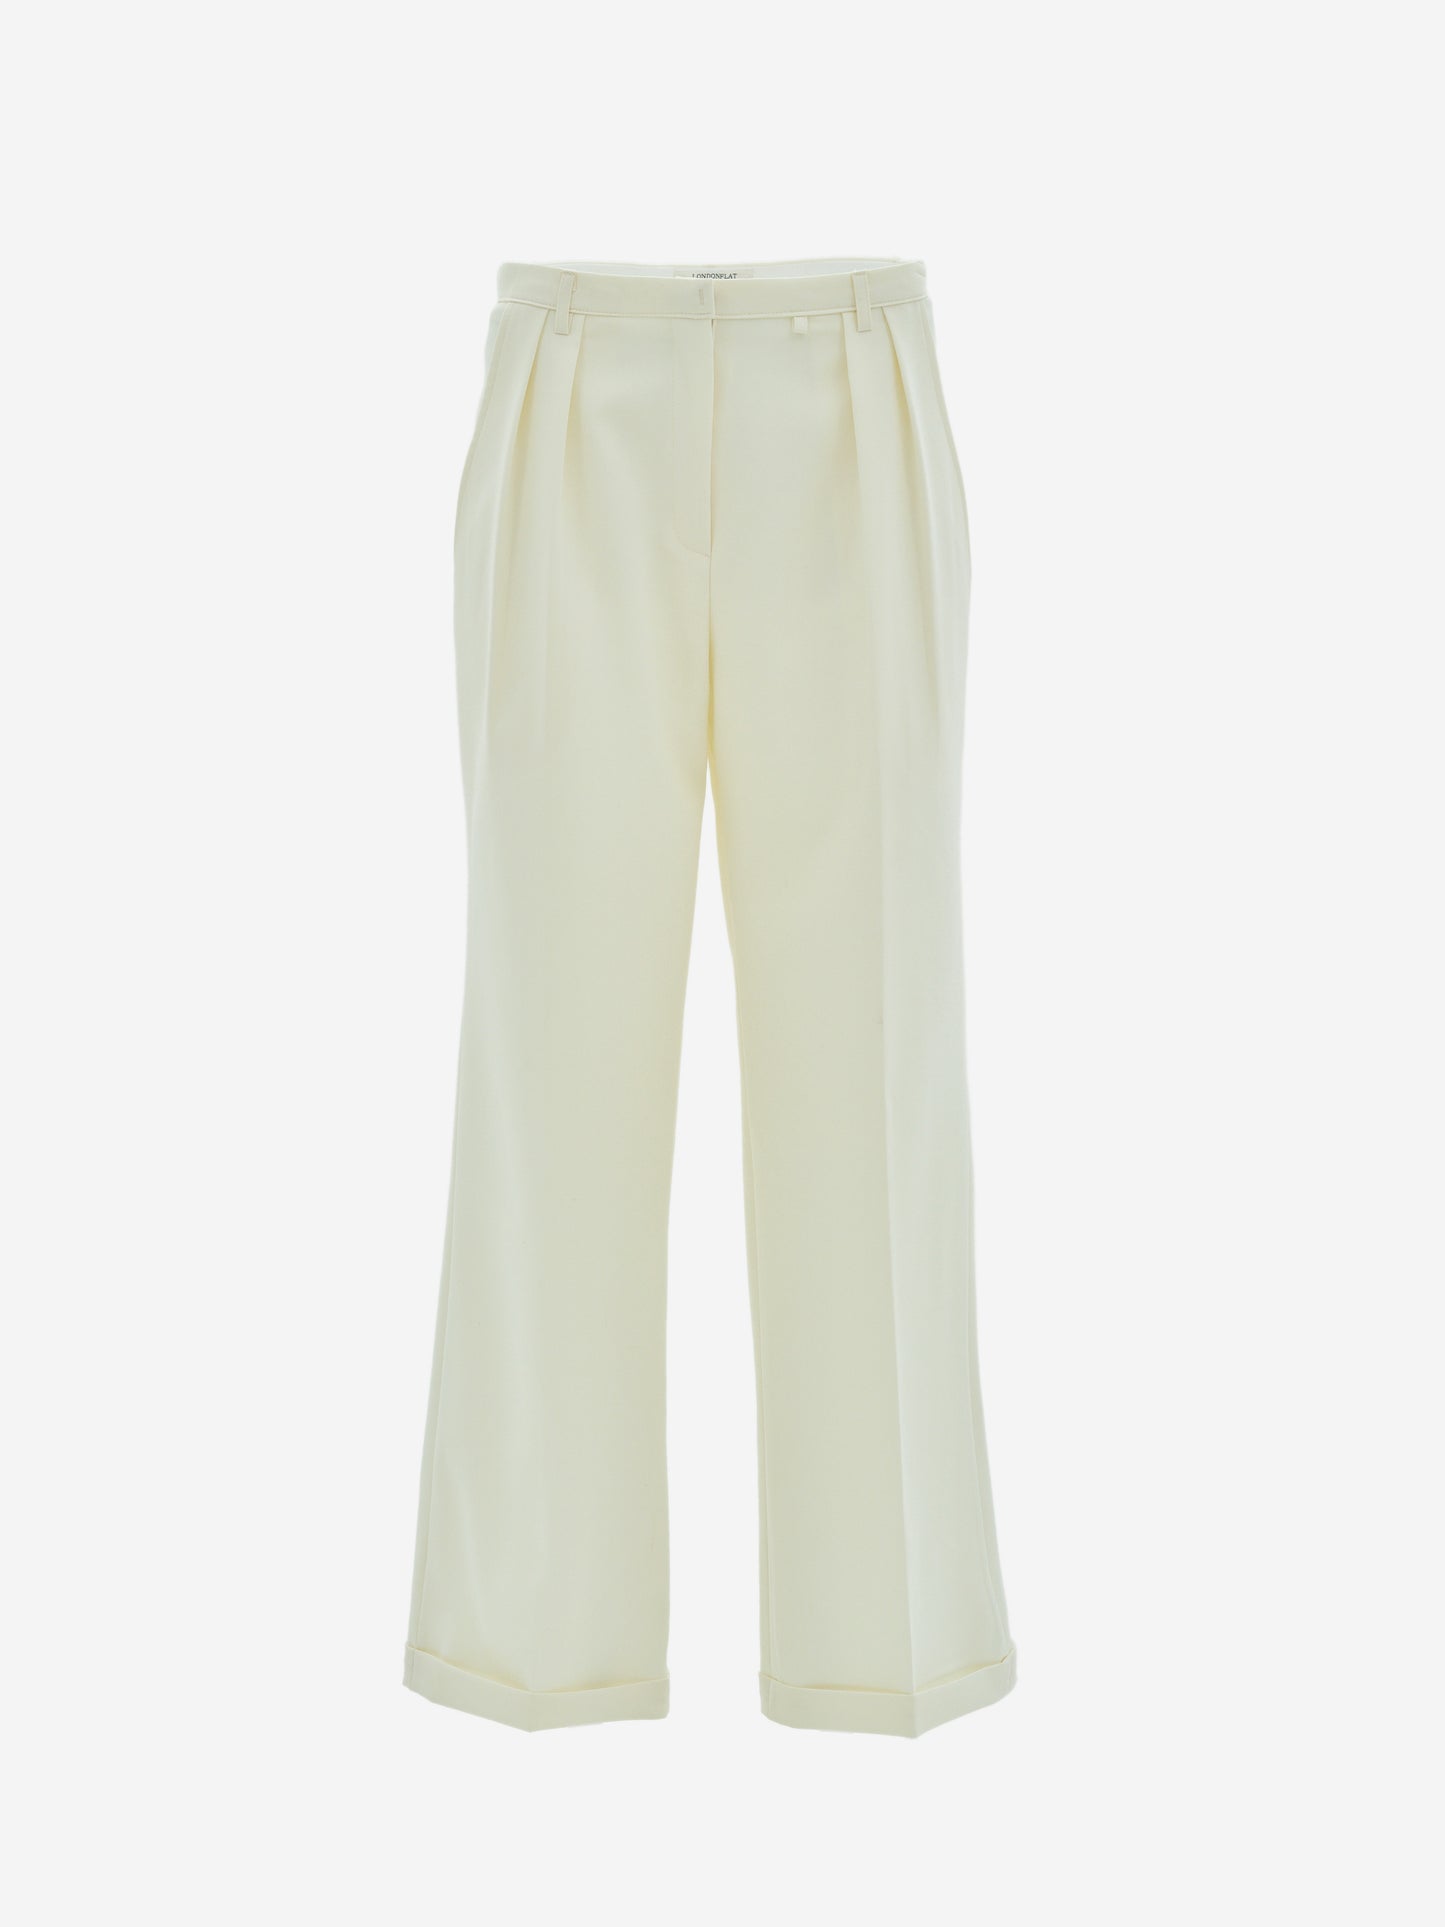 Low-Rise Tencel Trousers, Champagne